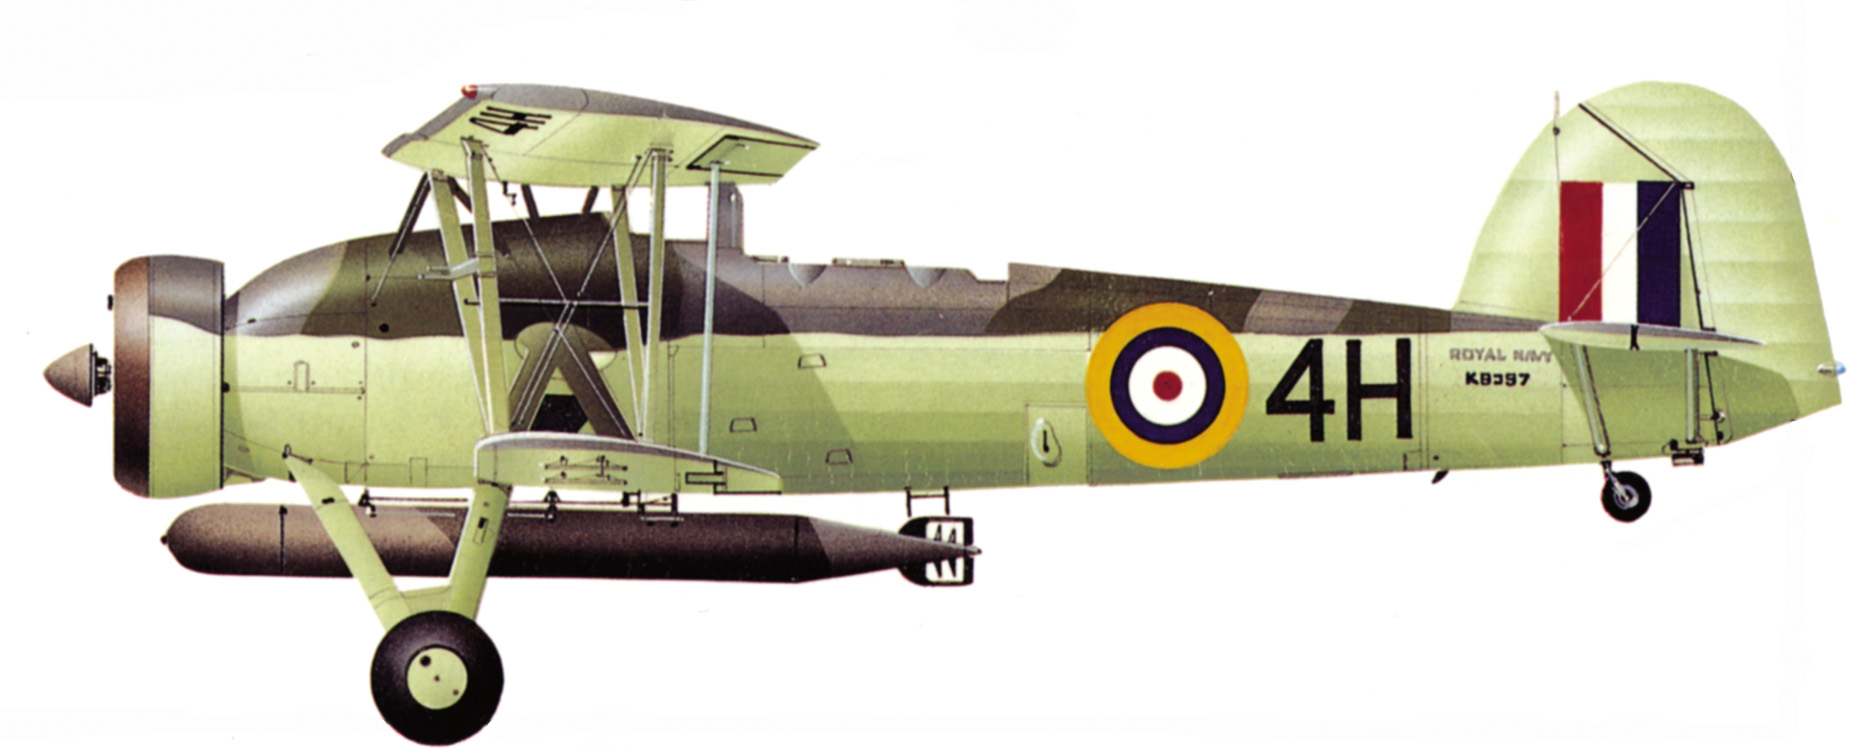 Although its top speed was a lumbering 138 miles per hour, the Fairey Swordfish MK I had an effective range of 546 miles.  